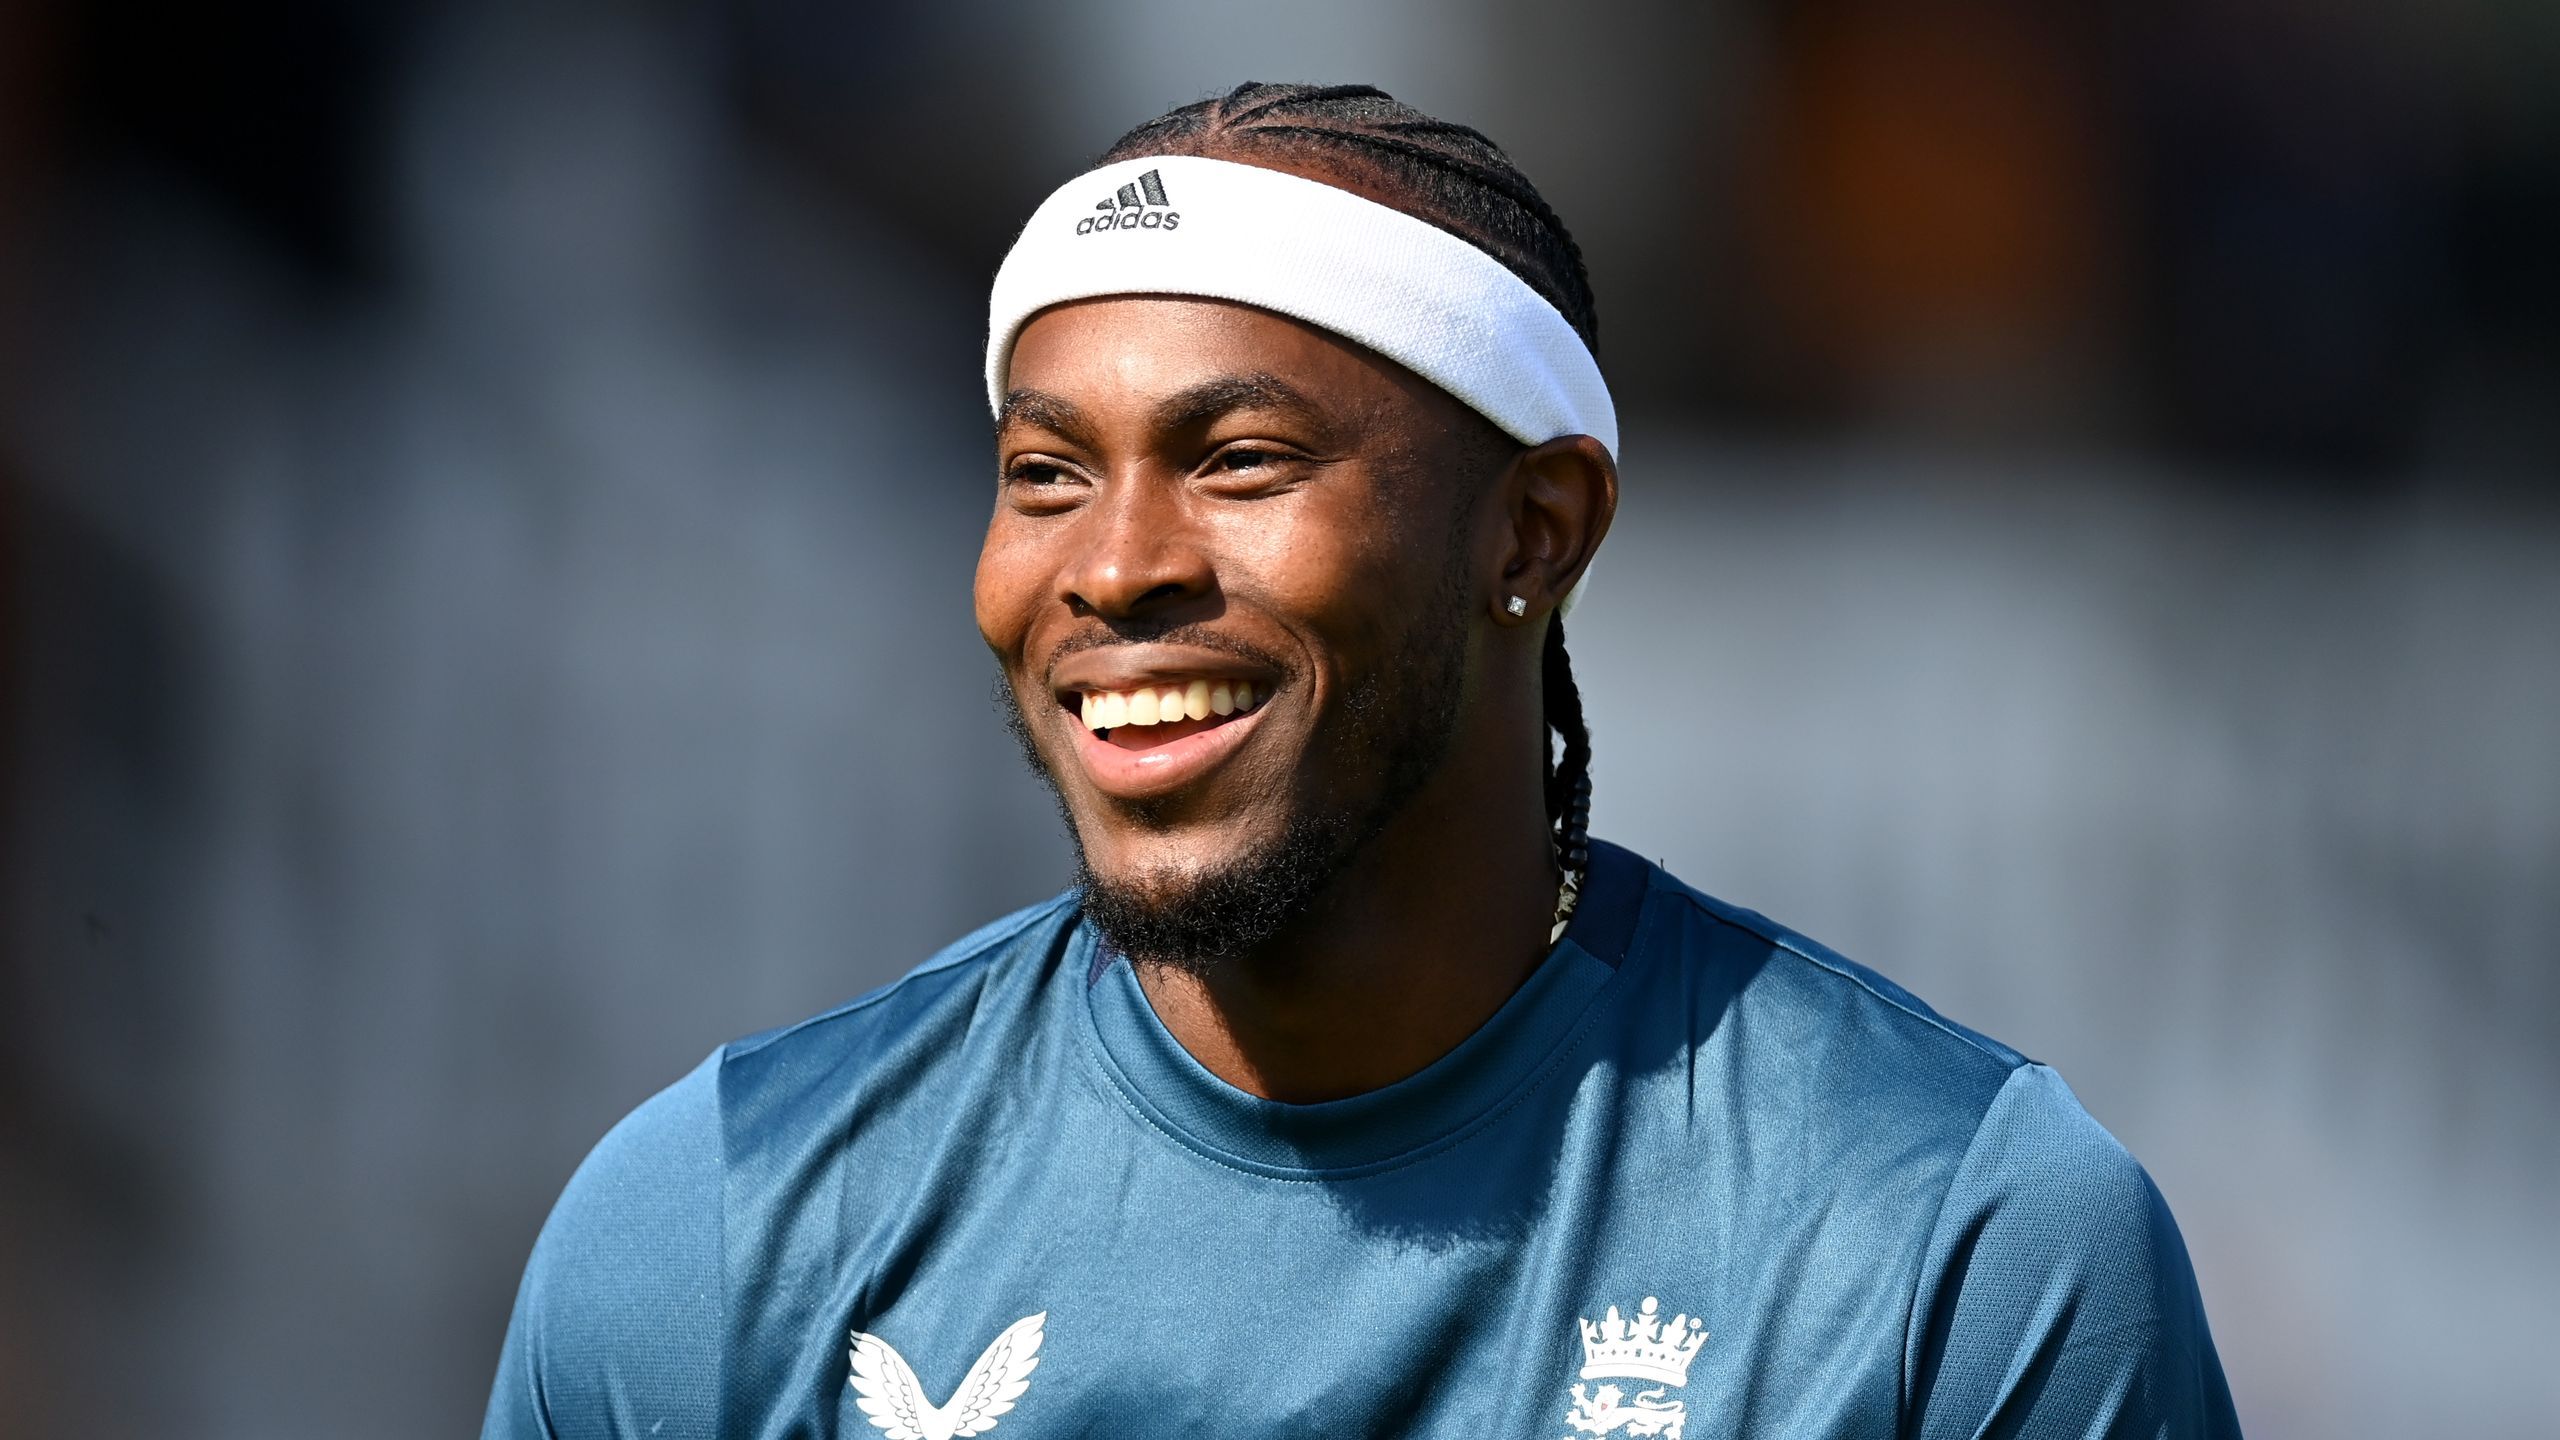 Jofra Archer named in England's provisional squad for T20 World Cup in